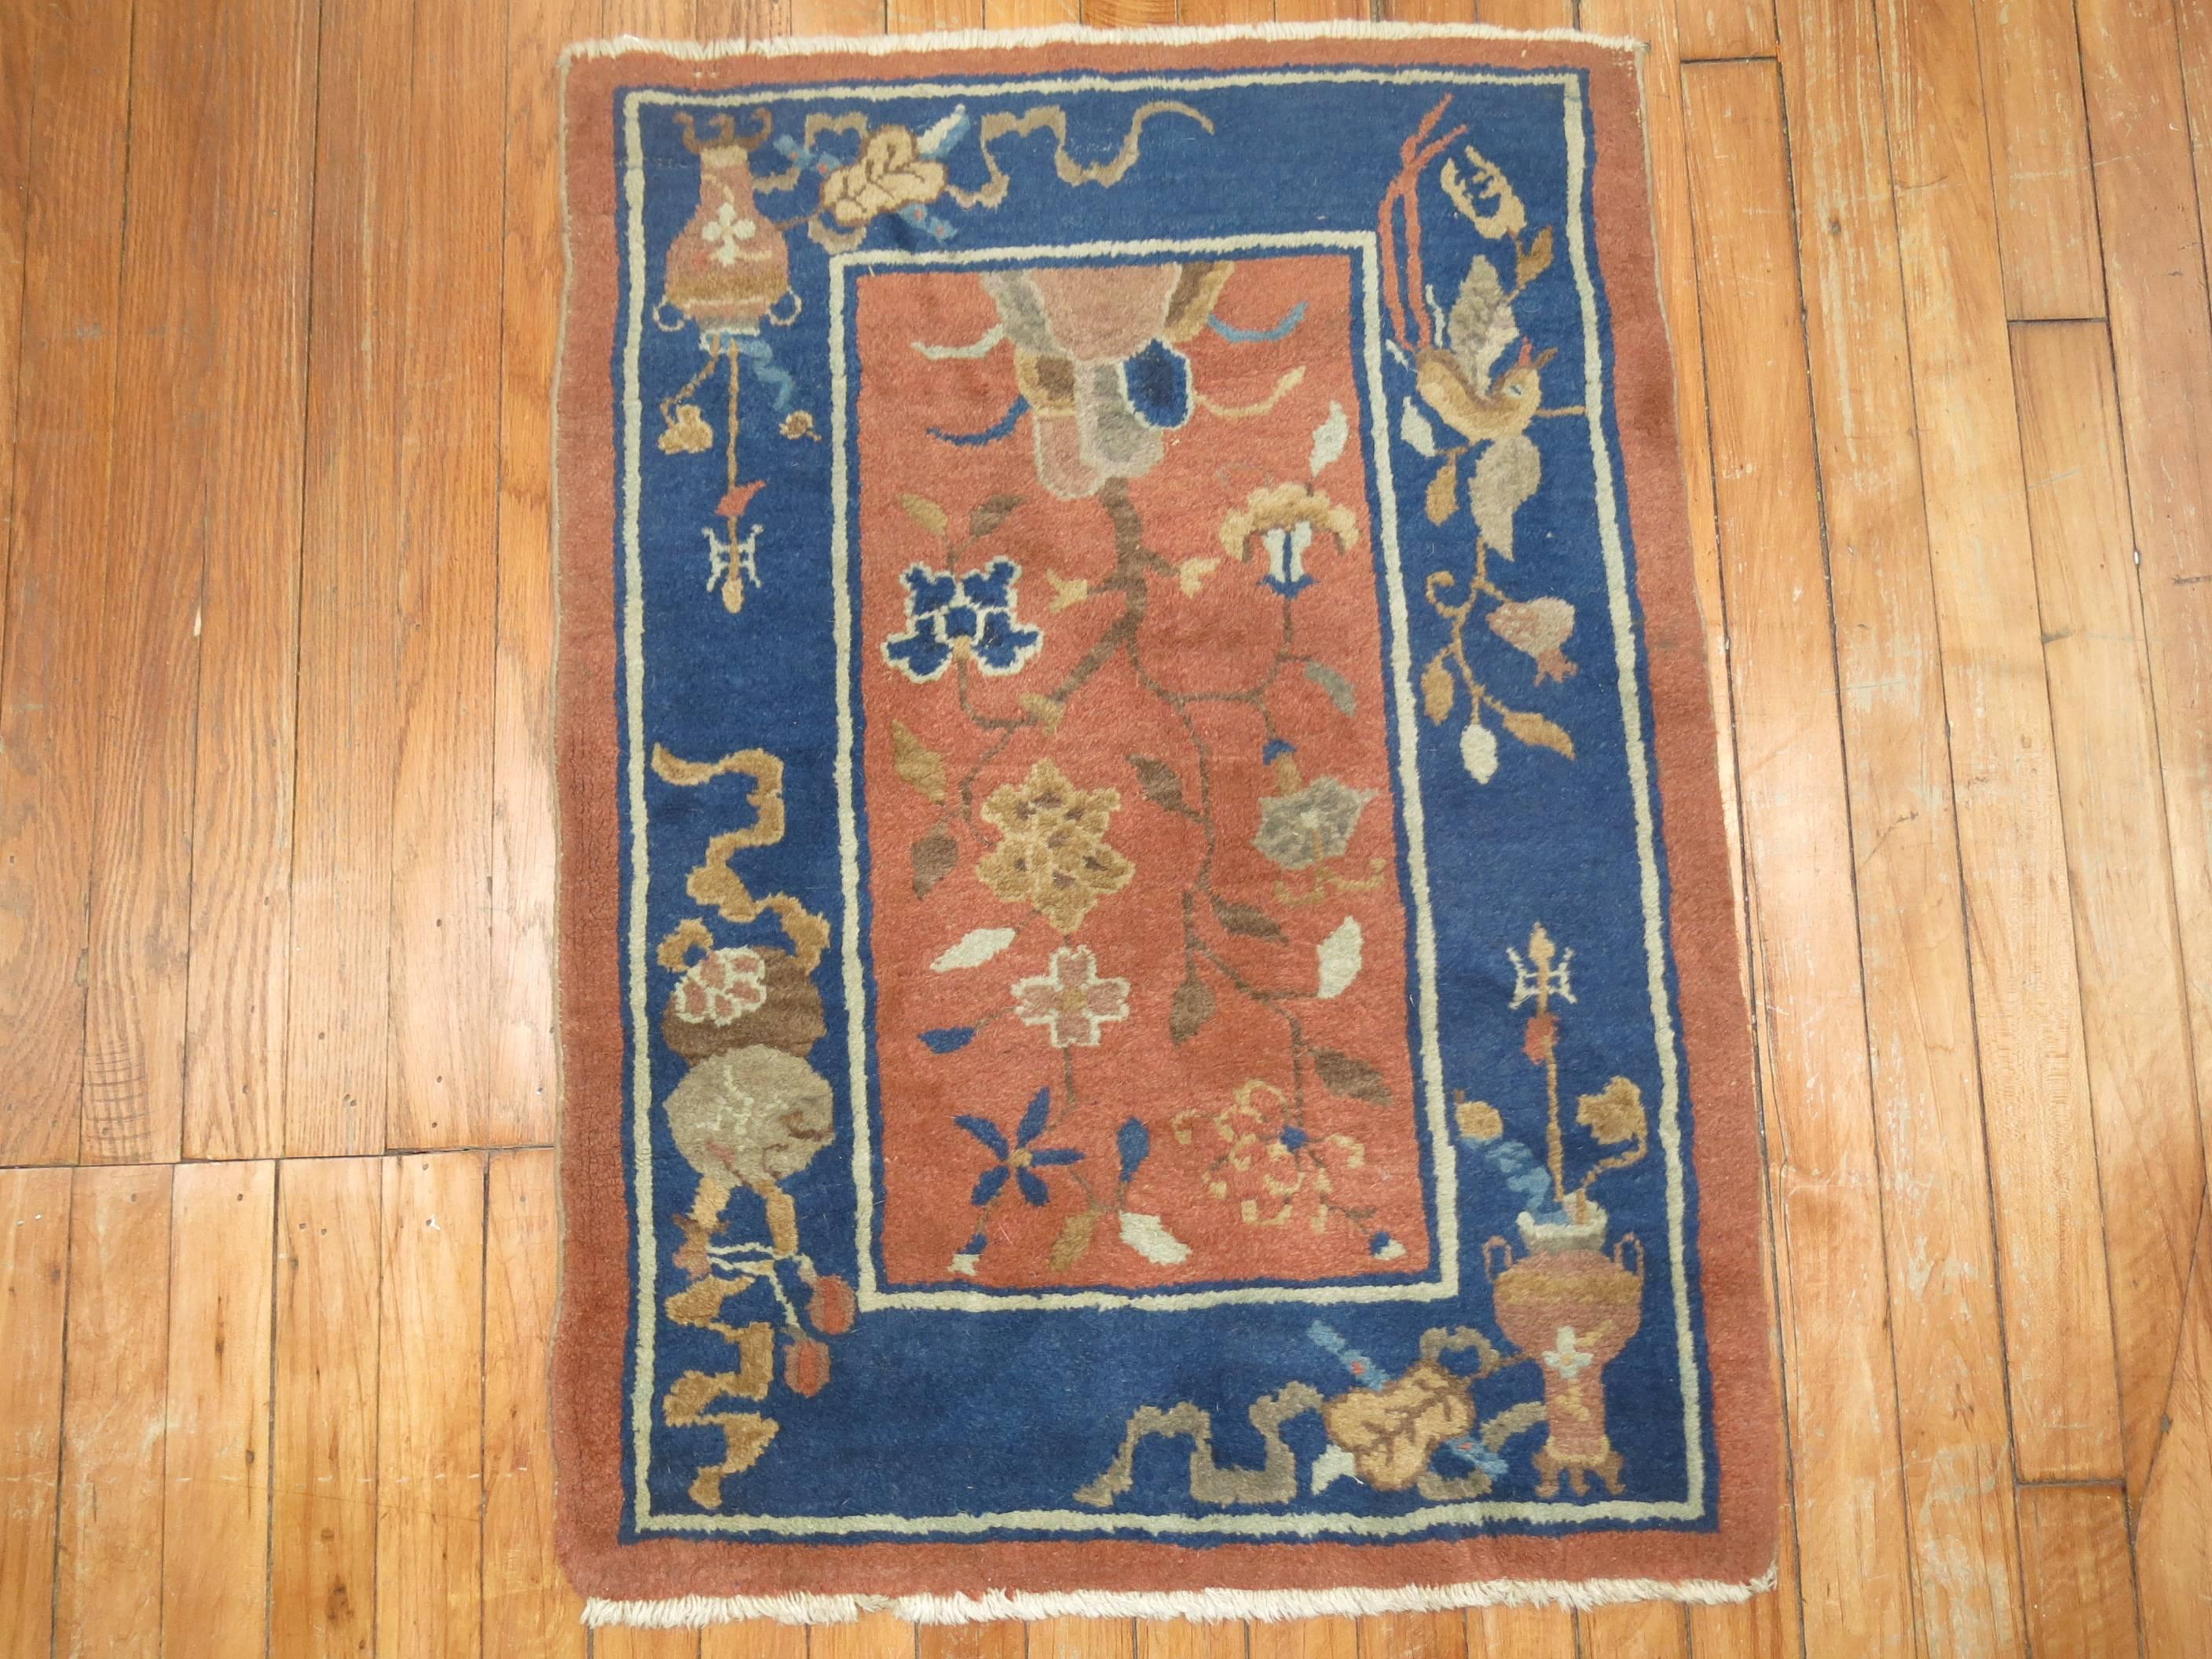 Rare set of one of a kind Chinese Art Deco rug mats.